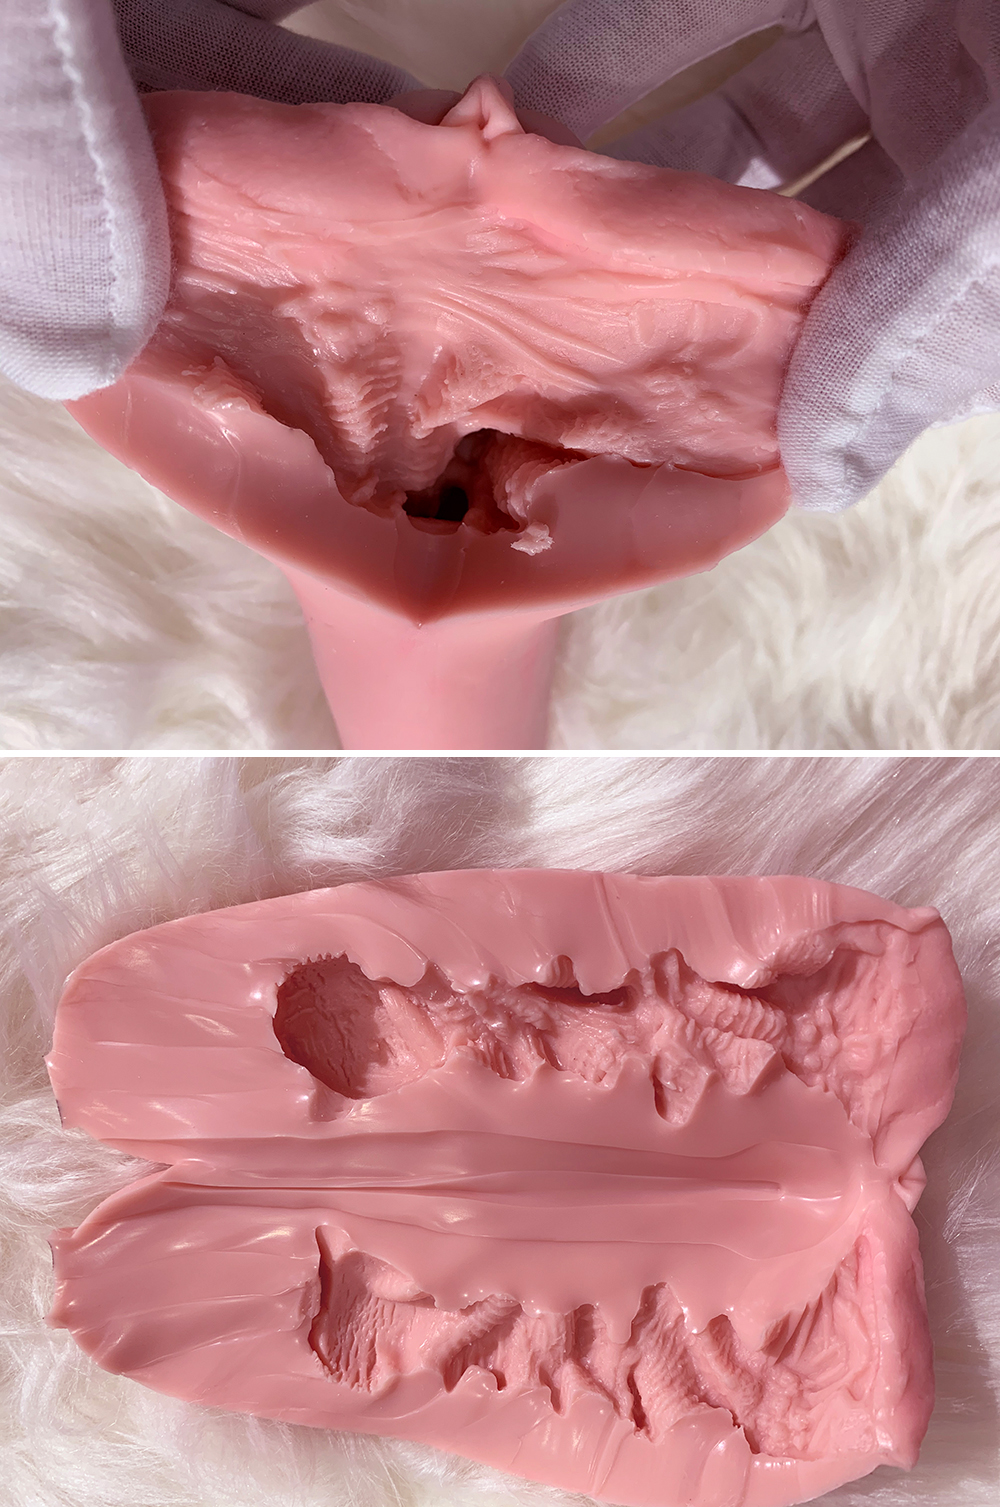 Gynoid Doll RZR|Realistic Silicone Sex Doll|Vagina cavity|Inside structure of vagina cavity|M11:12cm